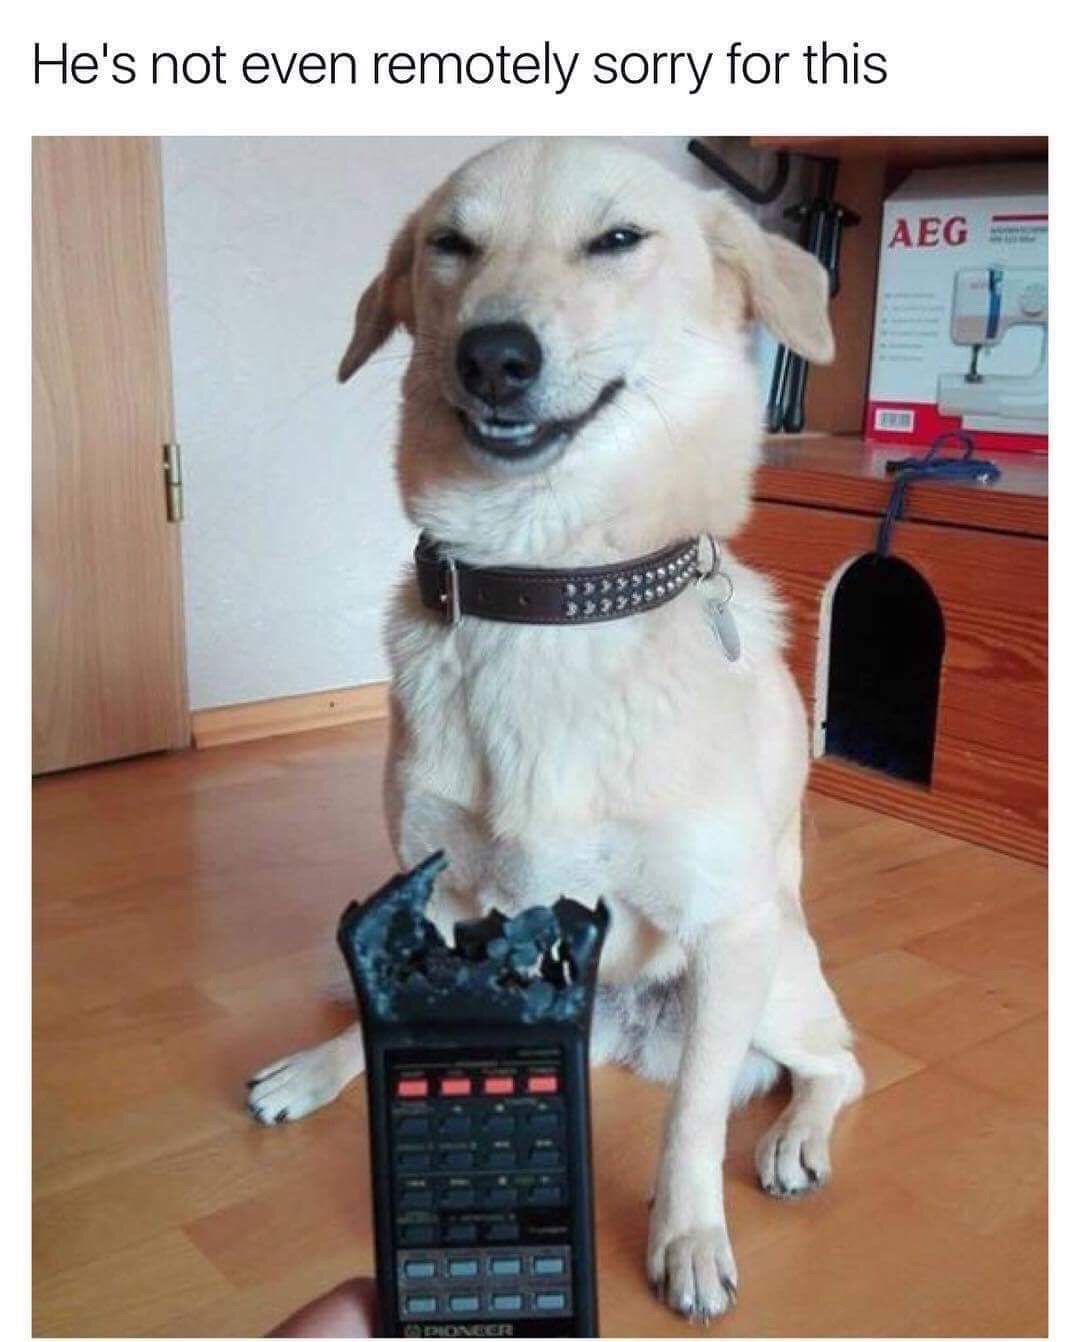 he's not even remotely sorry - He's not even remotely sorry for this Aeg